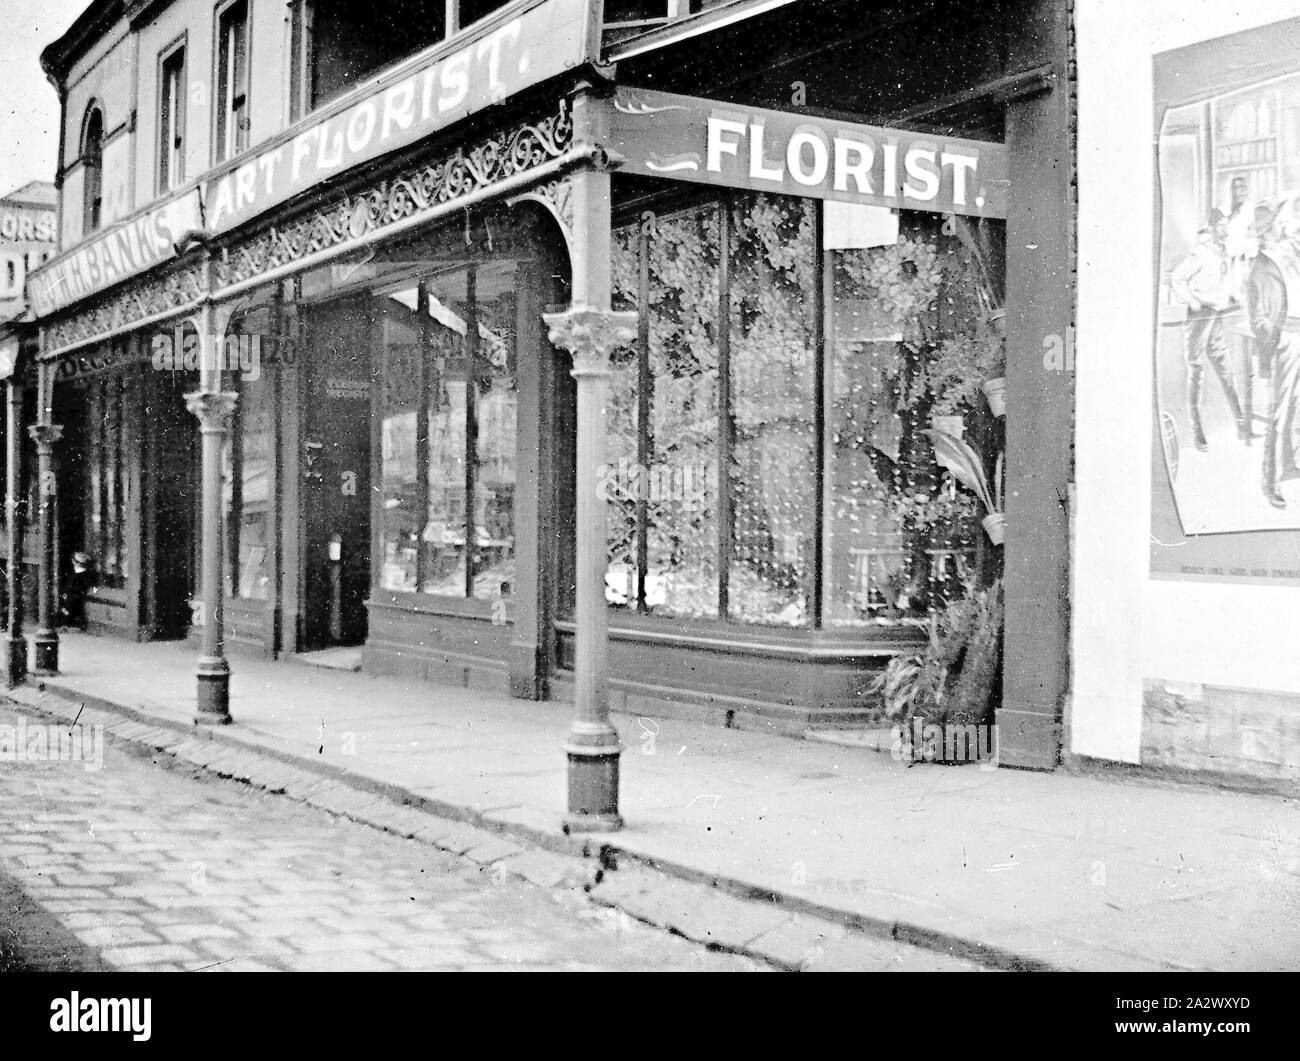 Negative - Fitzroy, Victoria, circa 1915, A florist's shop with the sign 'W.H. Banks Art Florist'. There is a wide bluestone guttering and cobblestones in the foreground Stock Photo